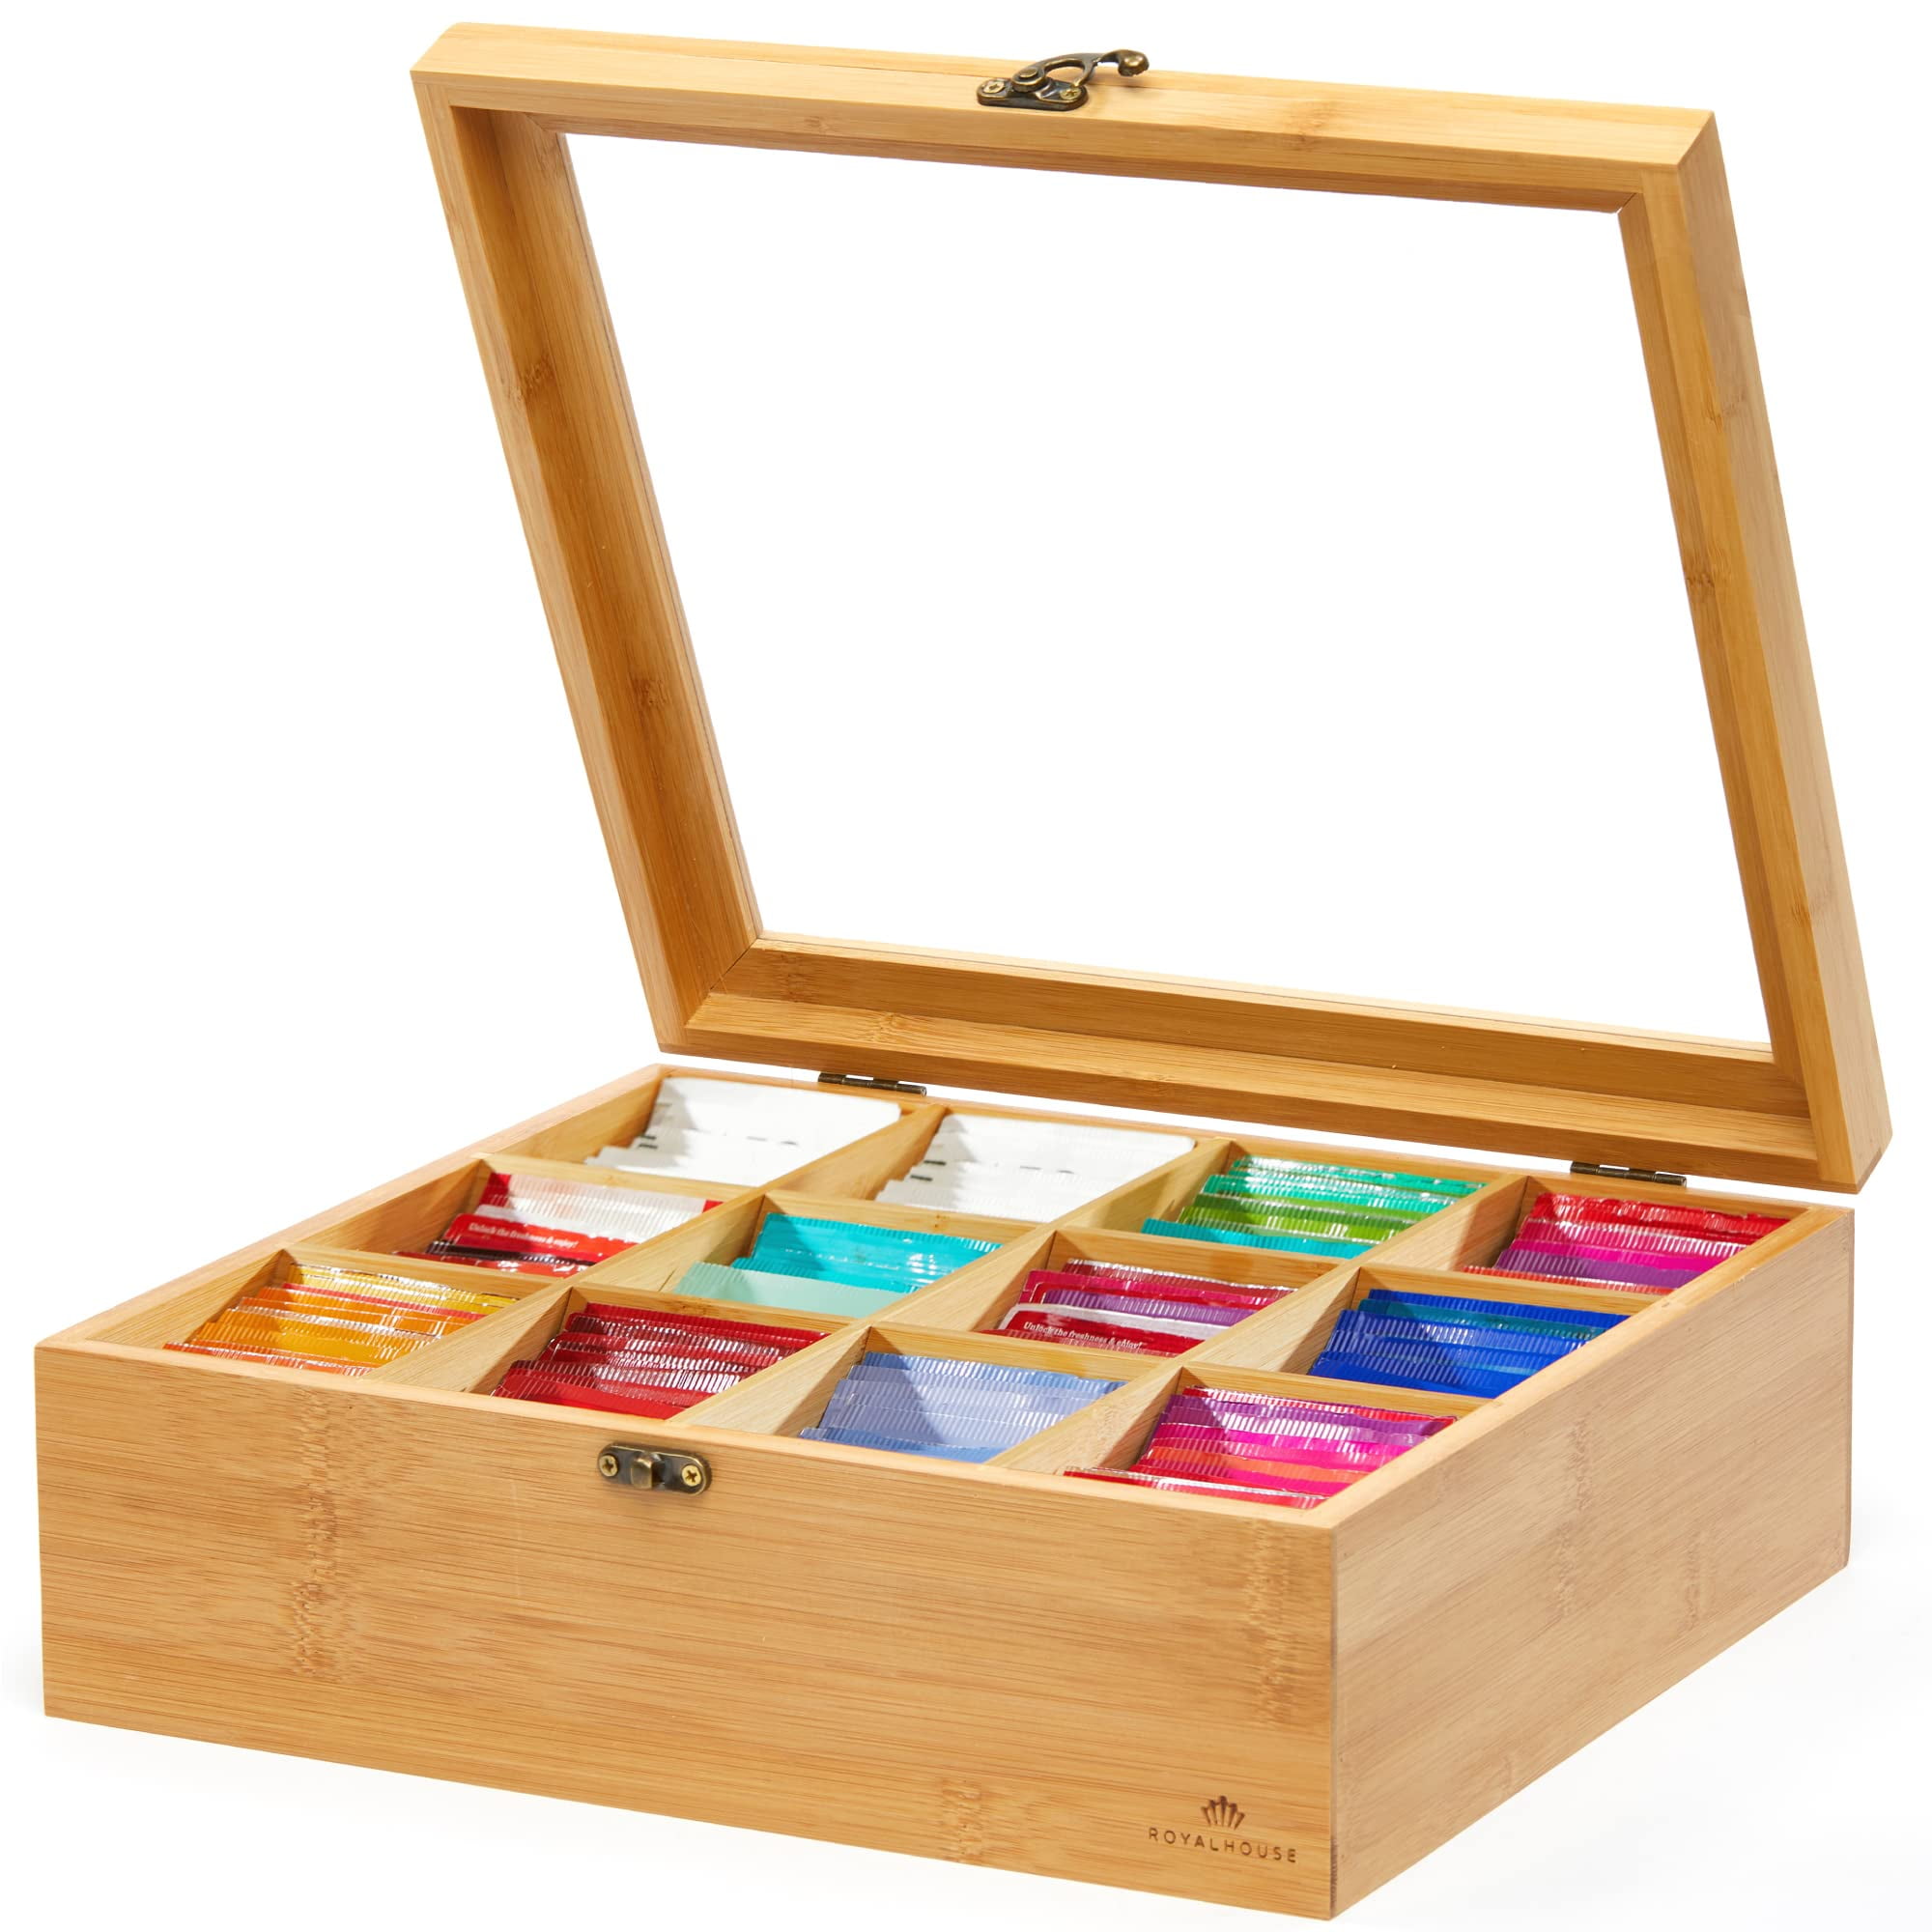 Natural Bamboo Tea Organizer - 6 Compartments, with Plastic Cover - 8 1/2  x 8 x 3 1/2 - 1 count box